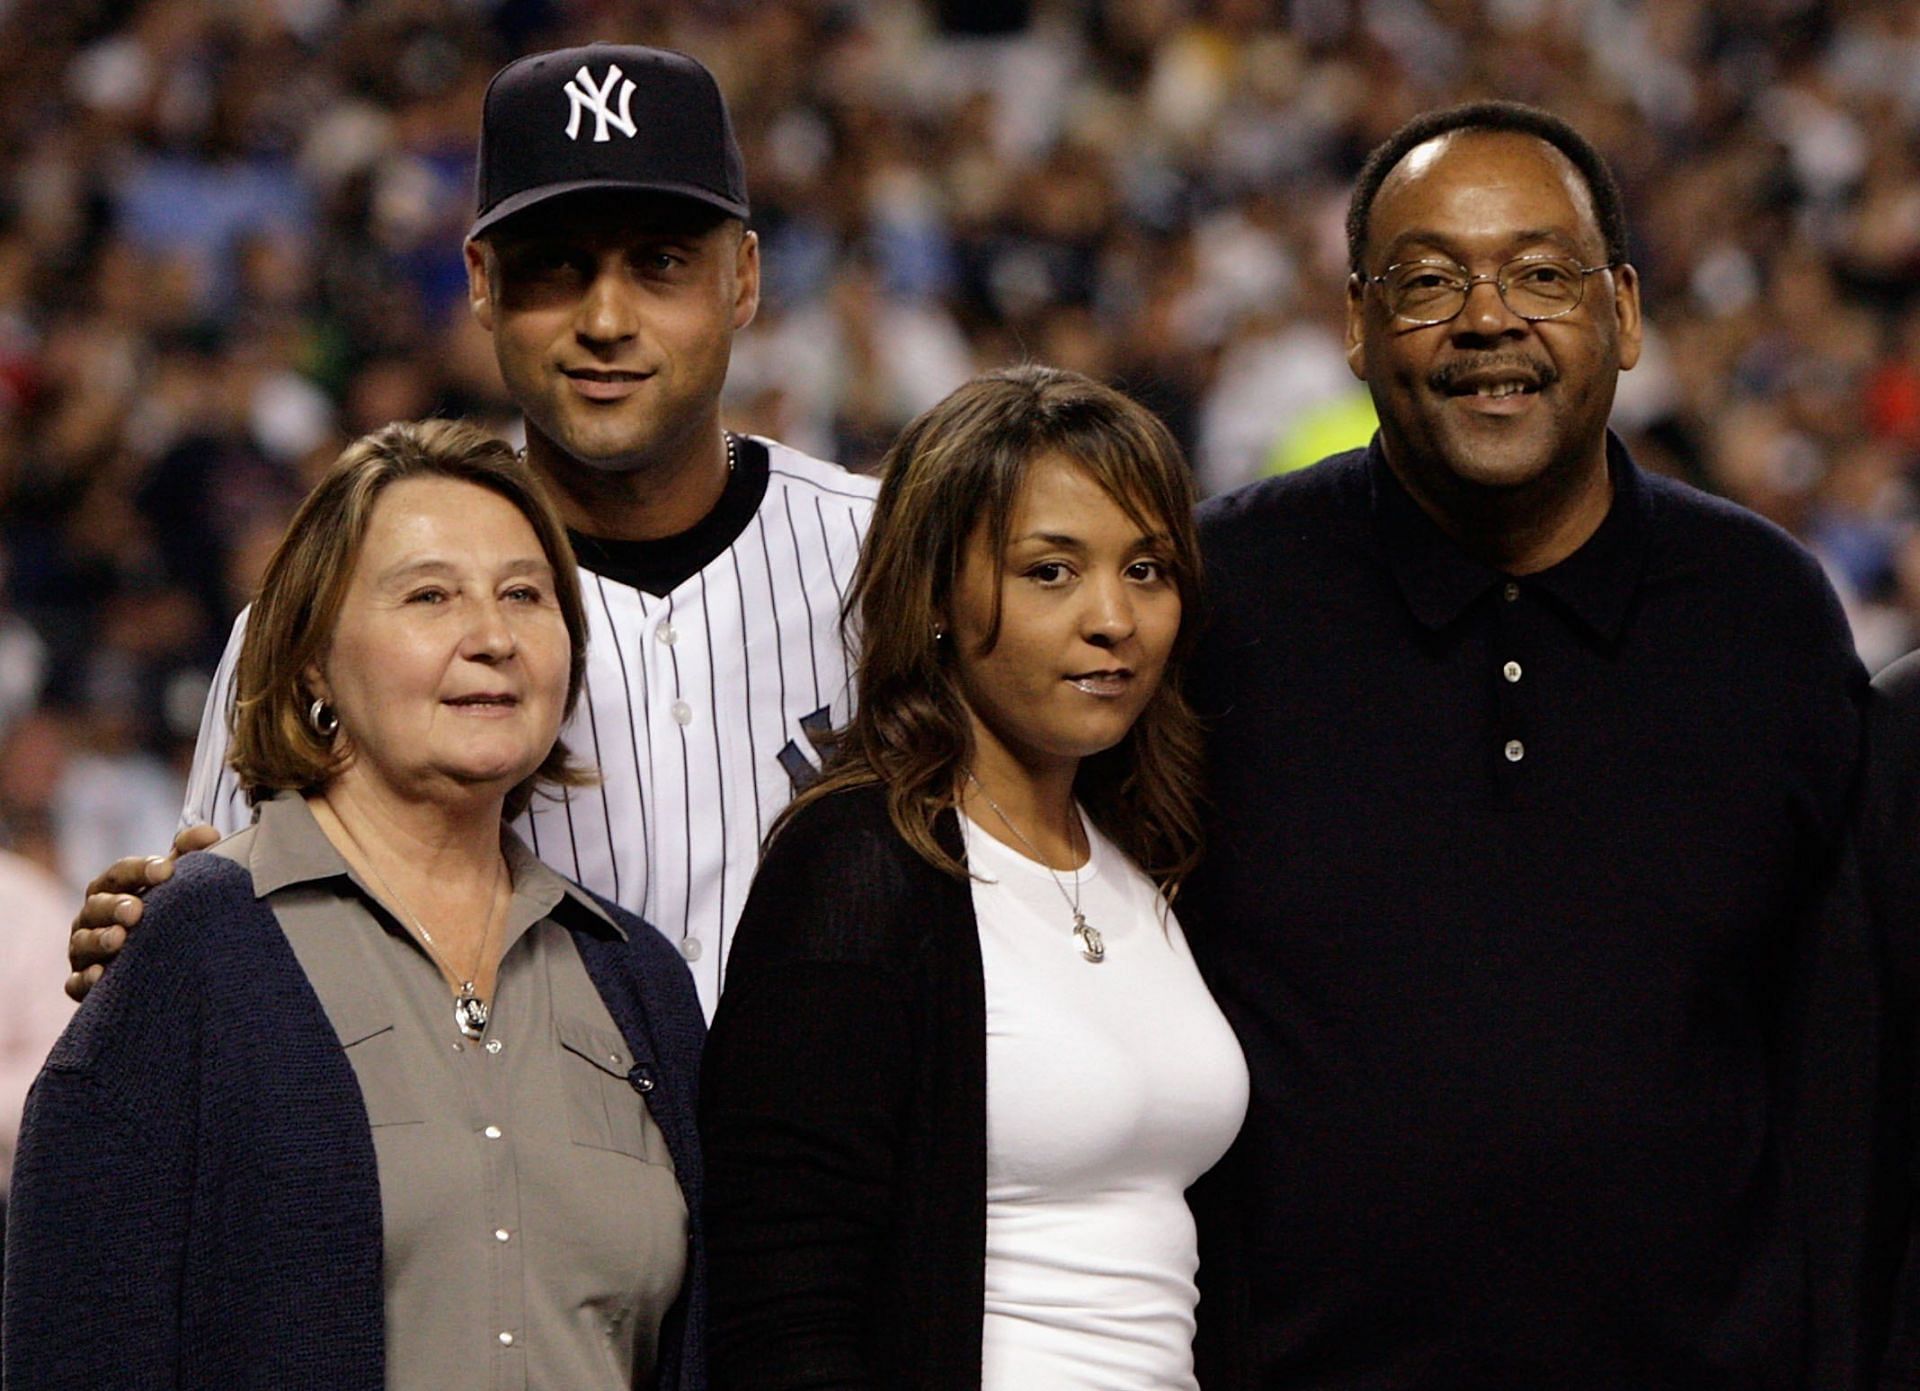 Jeter with his family at a Baltimore Orioles v New York Yankees game.